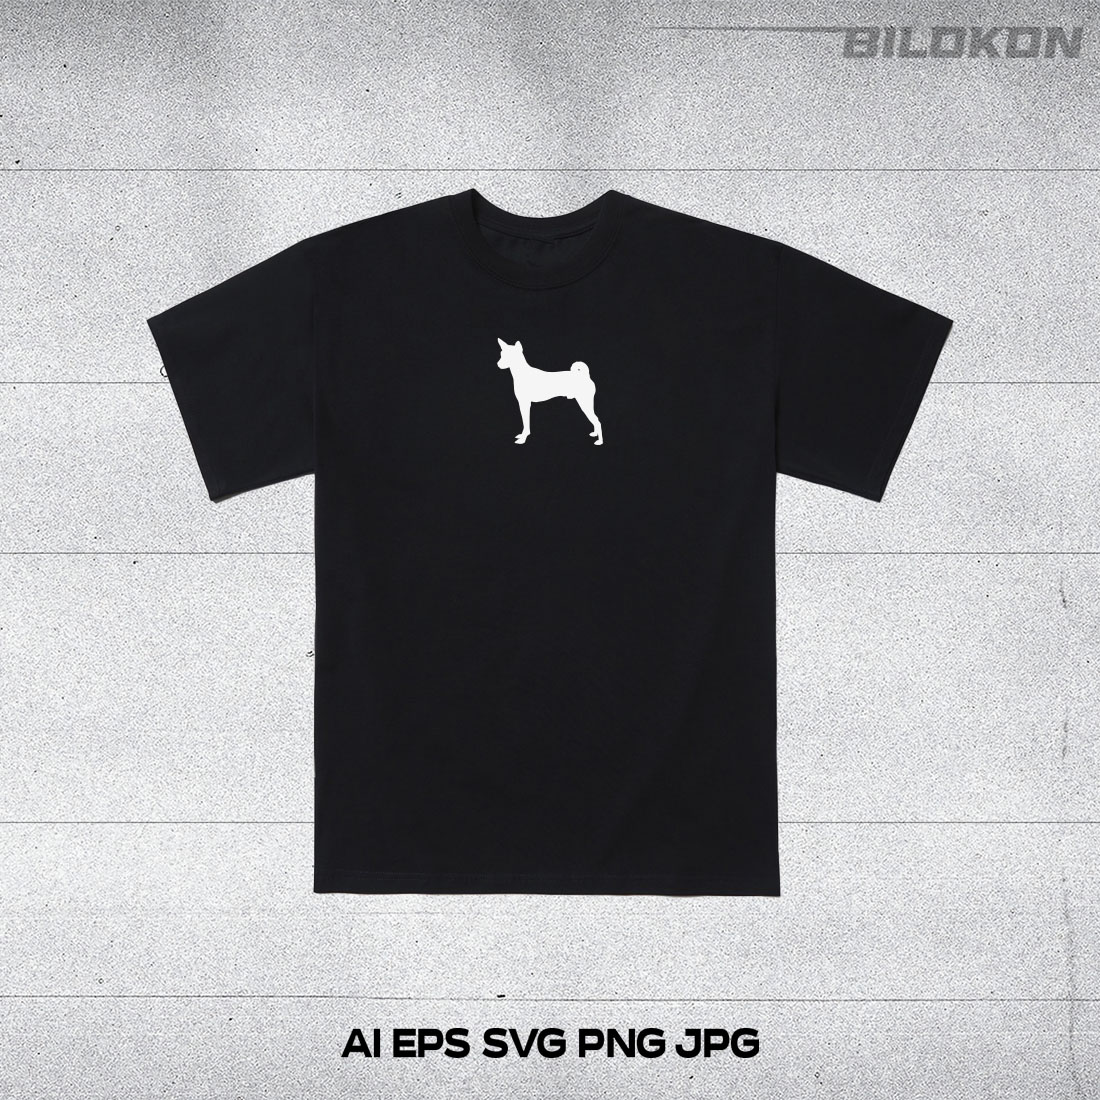 Black shirt with a white dog on it.